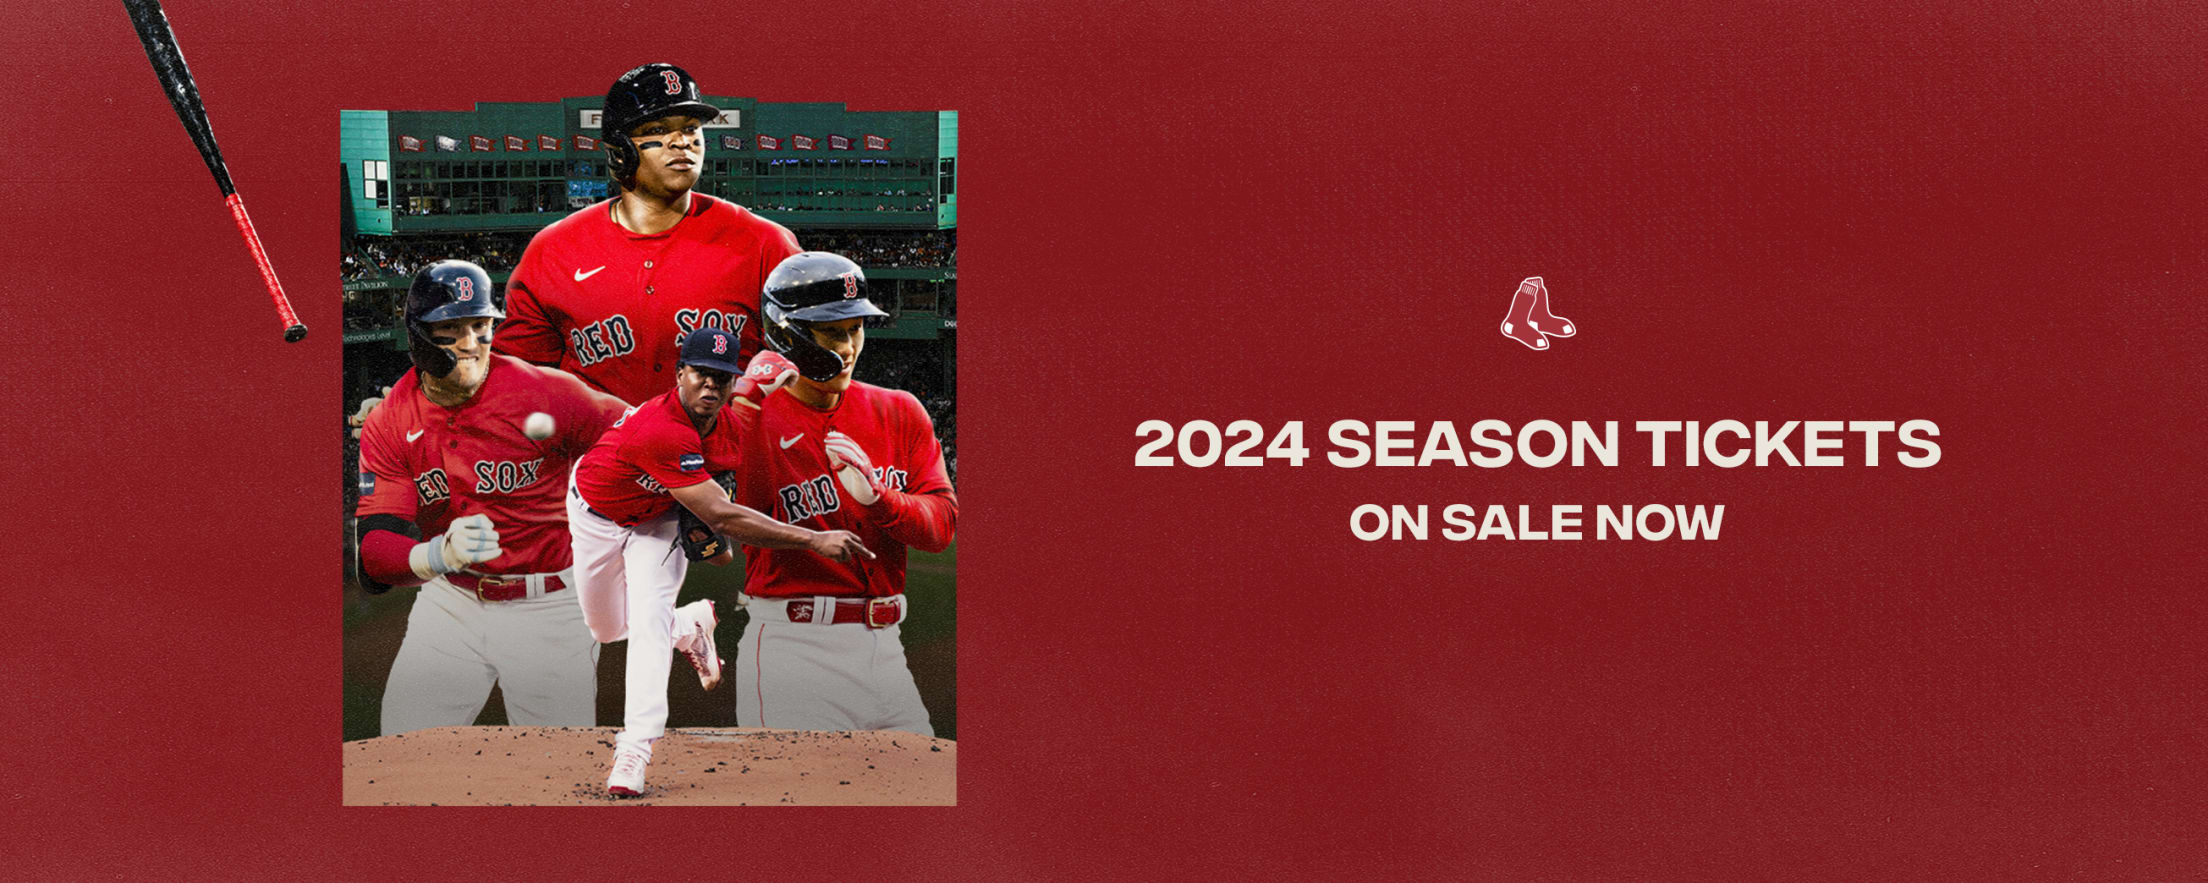 Guardians vs. Red Sox Tickets 2023